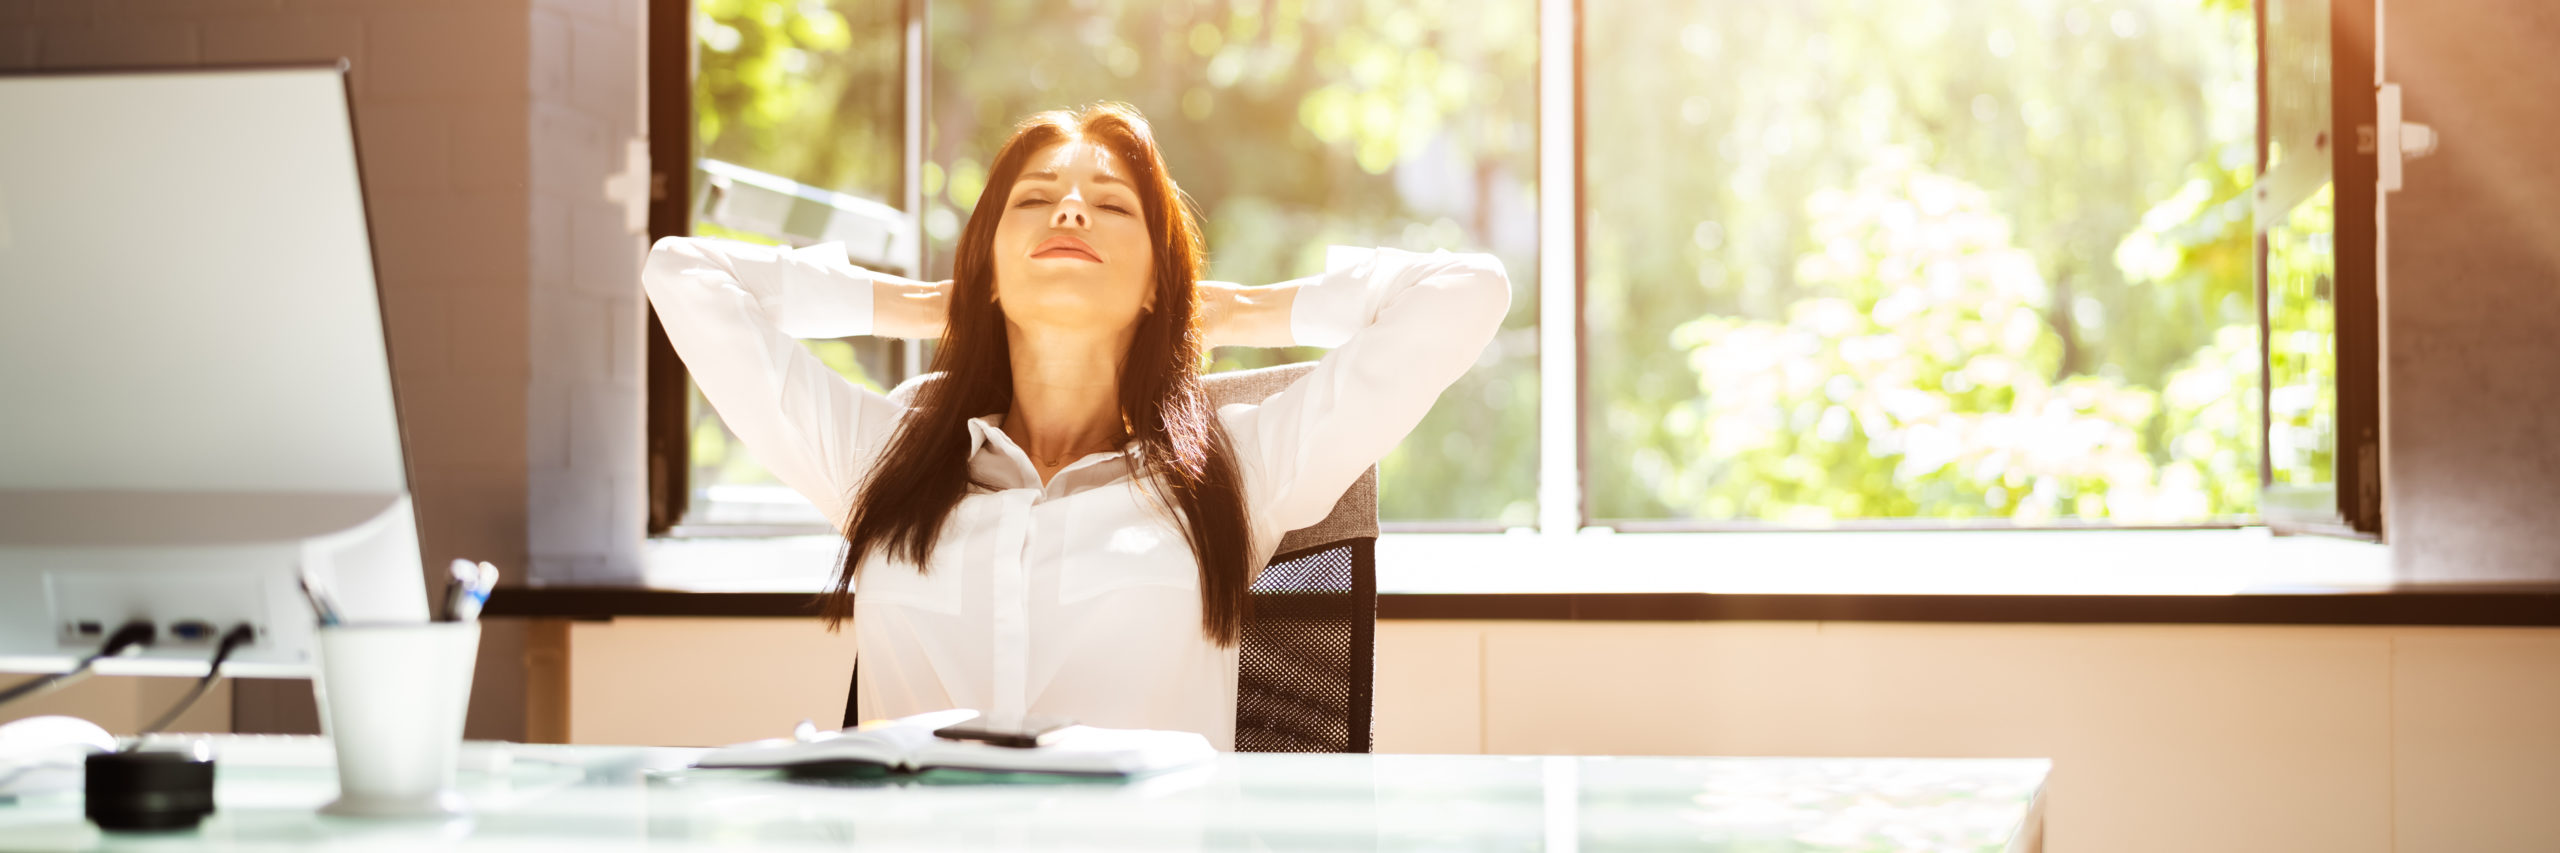 Open Window In Office with Woman with Brown Hair Breathing Fresh Air